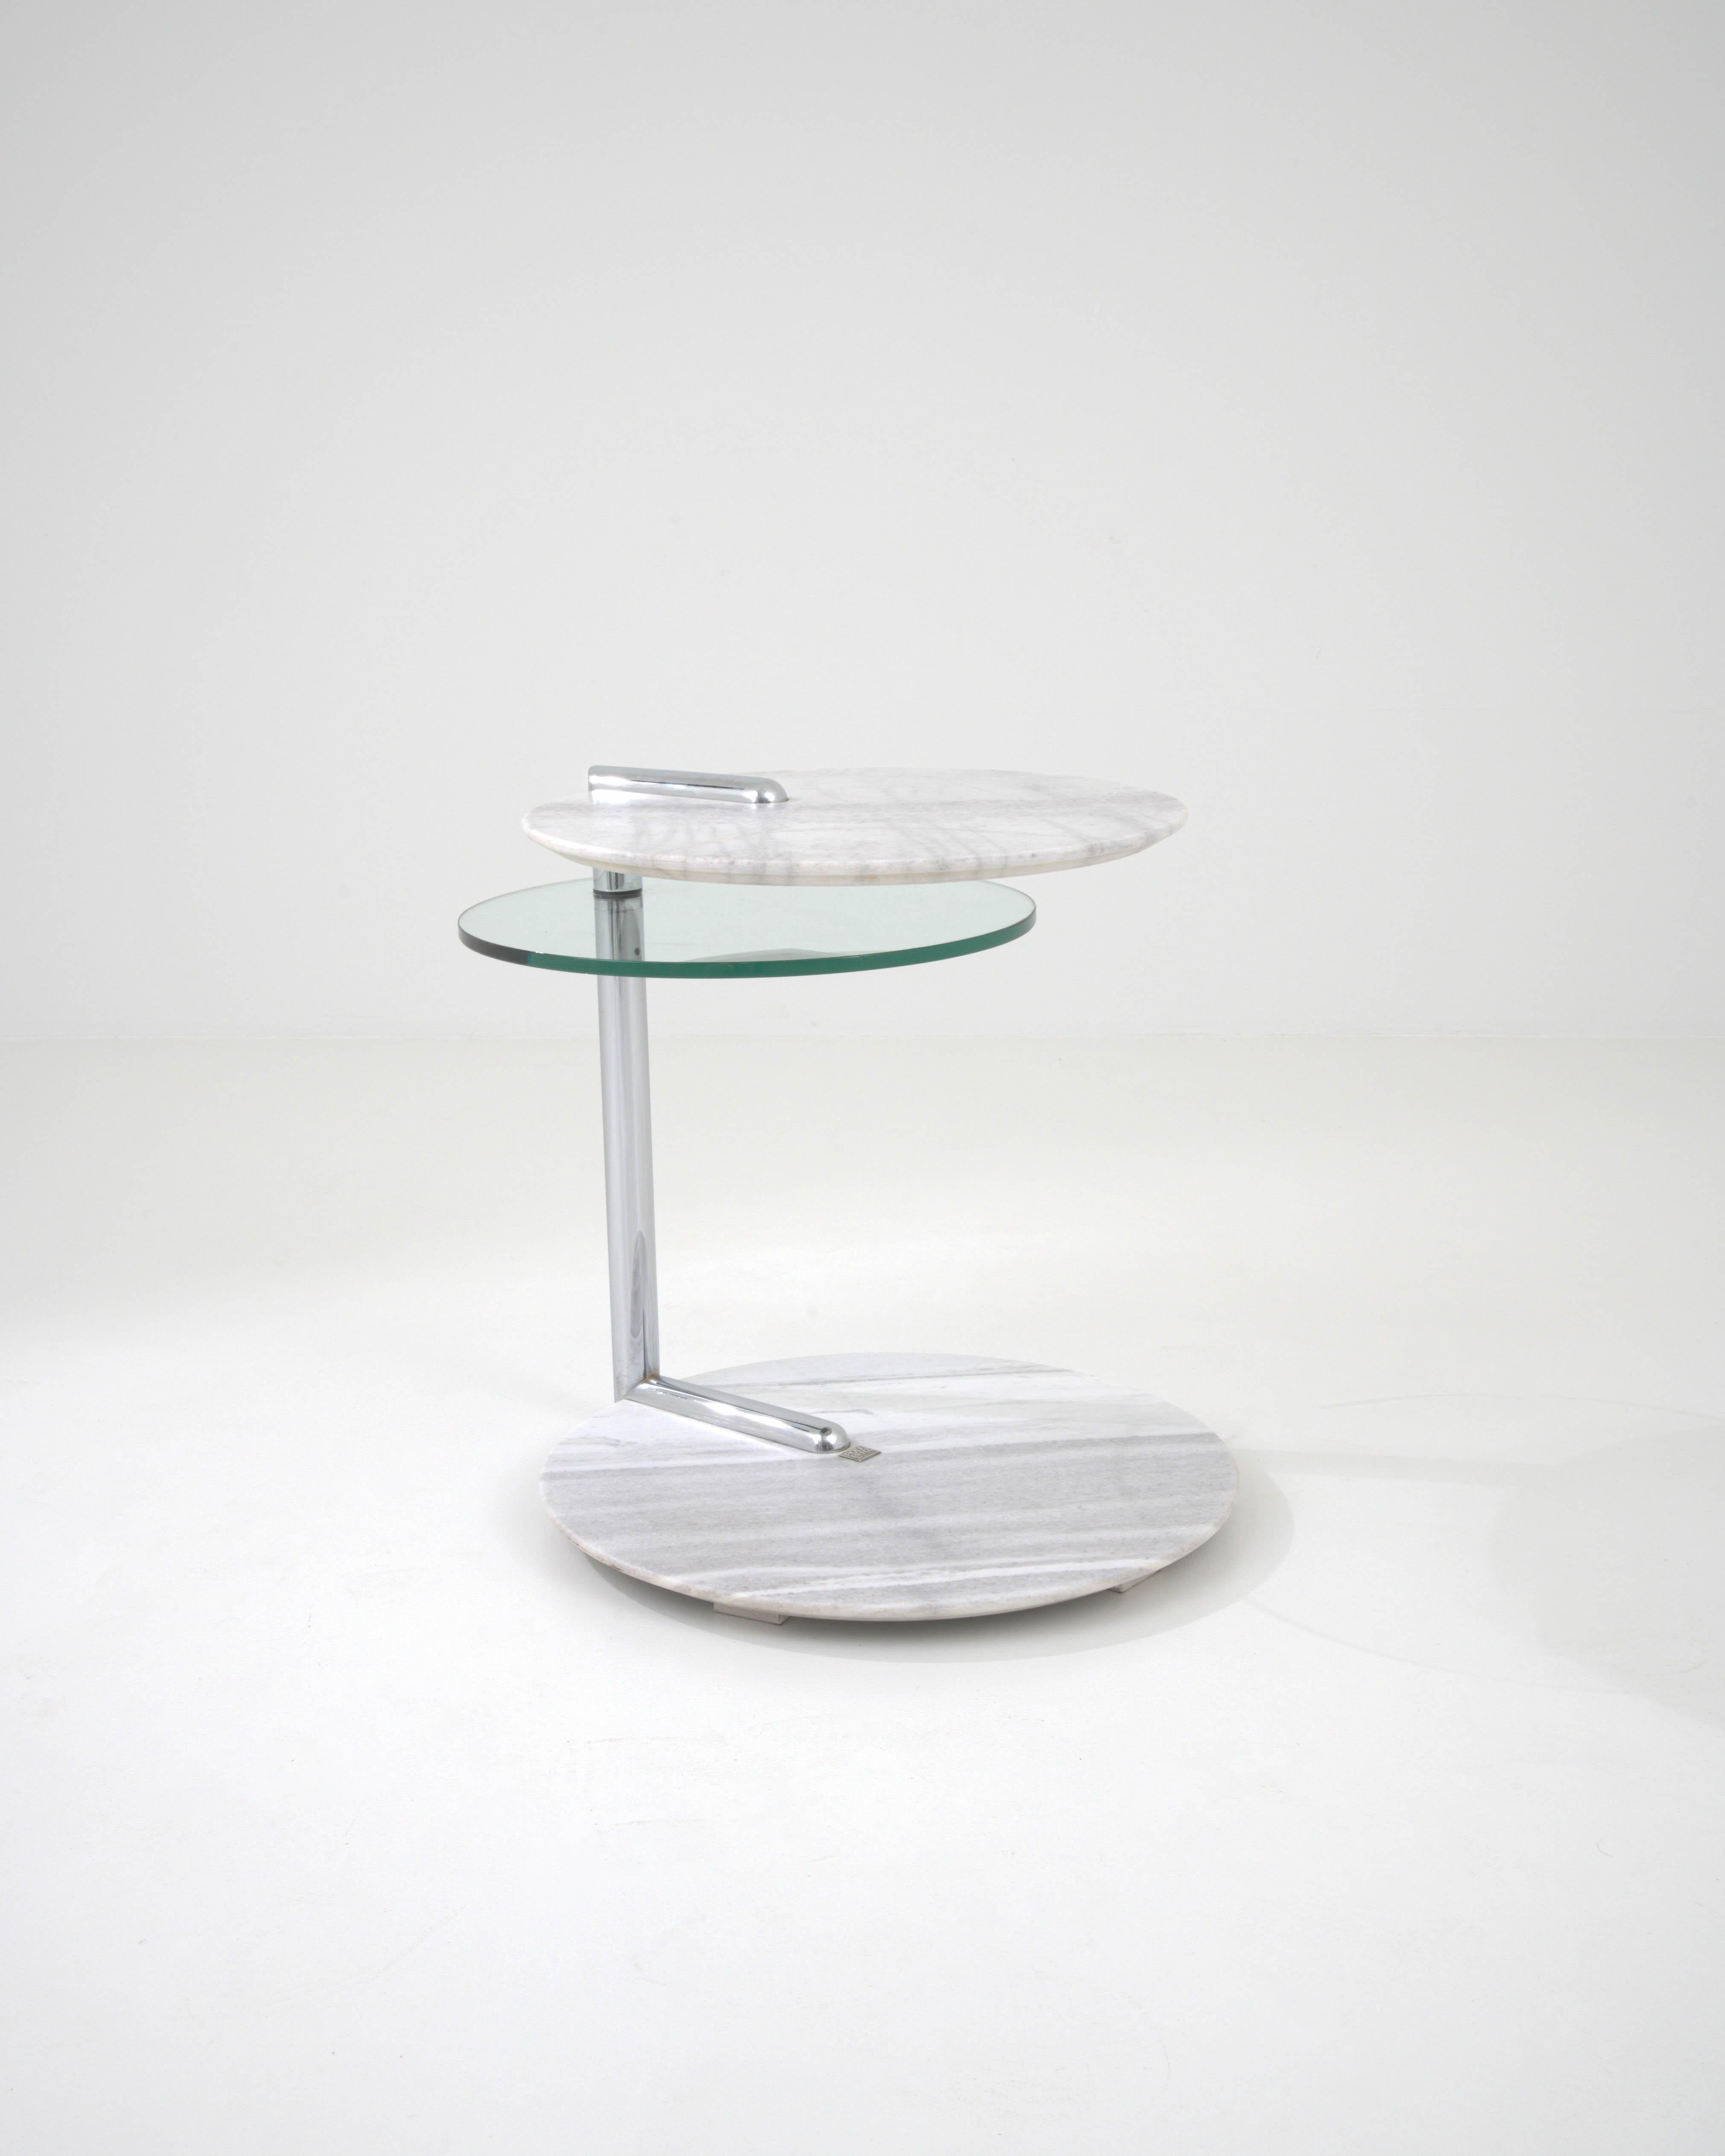 20th Century German Marble & Glass Coffee Table By Rolf Benz 5